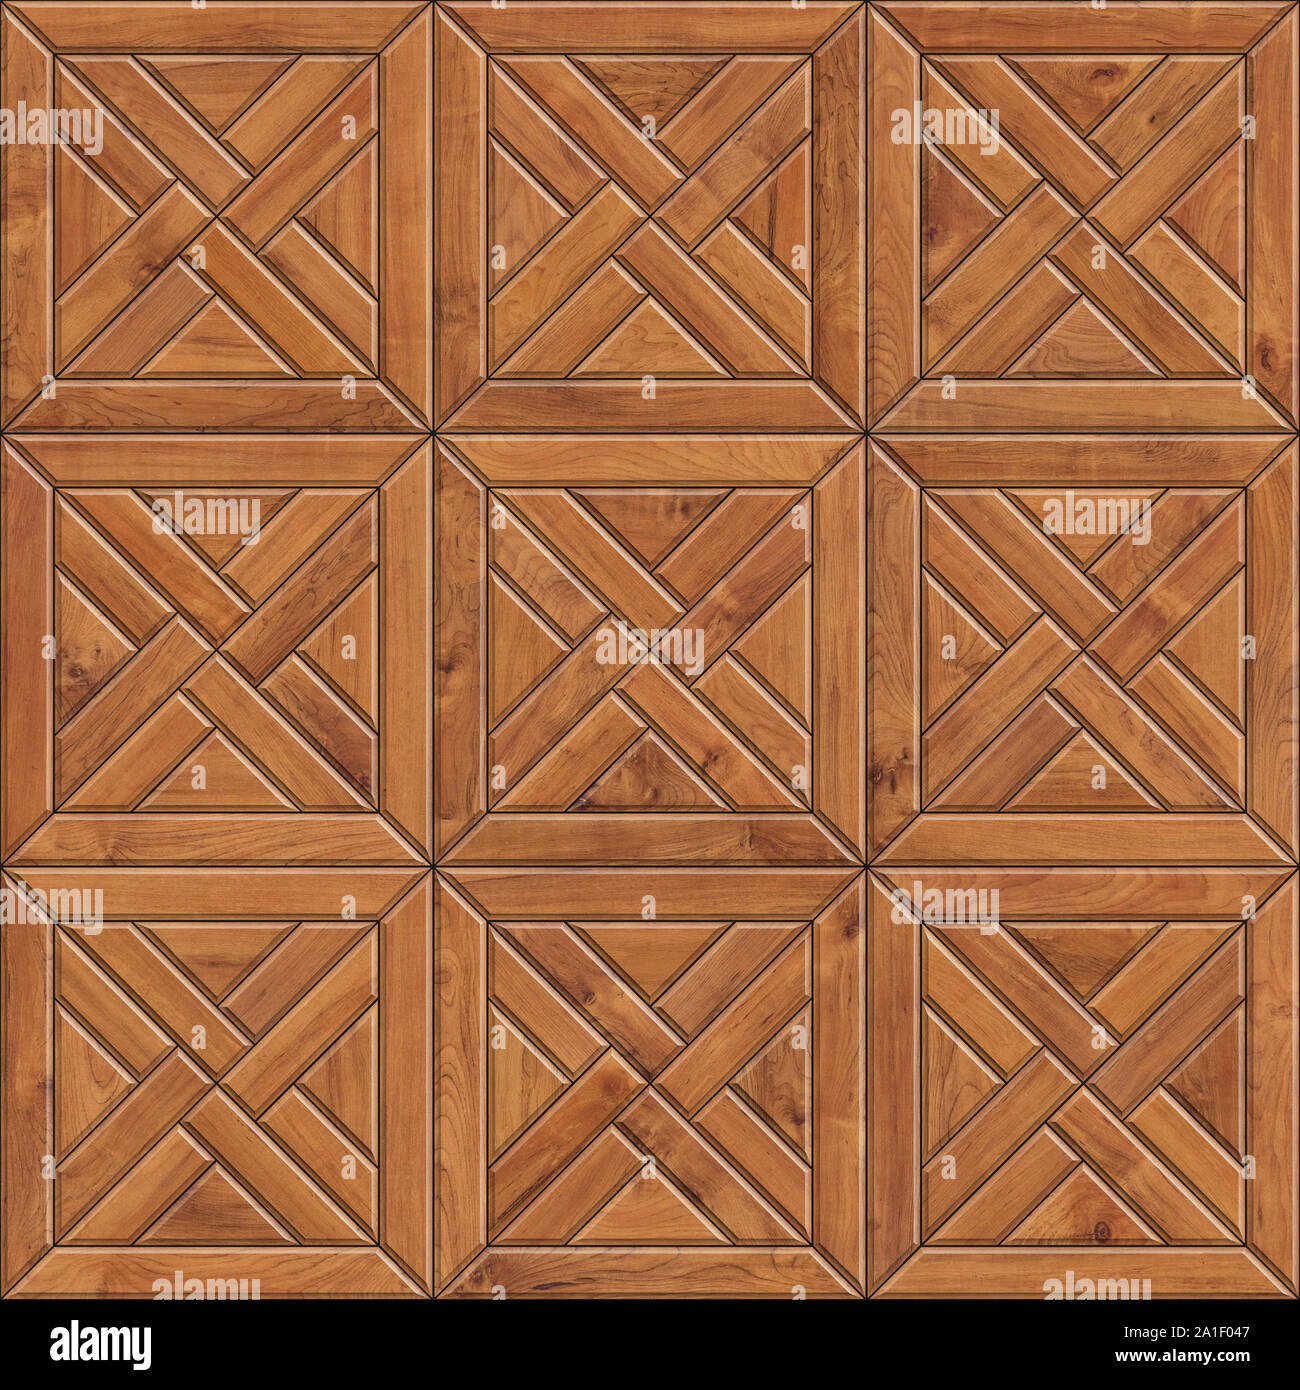 Seamless texture of mosaic wooden parquet. High resolution pattern of natural wood material Stock Photo